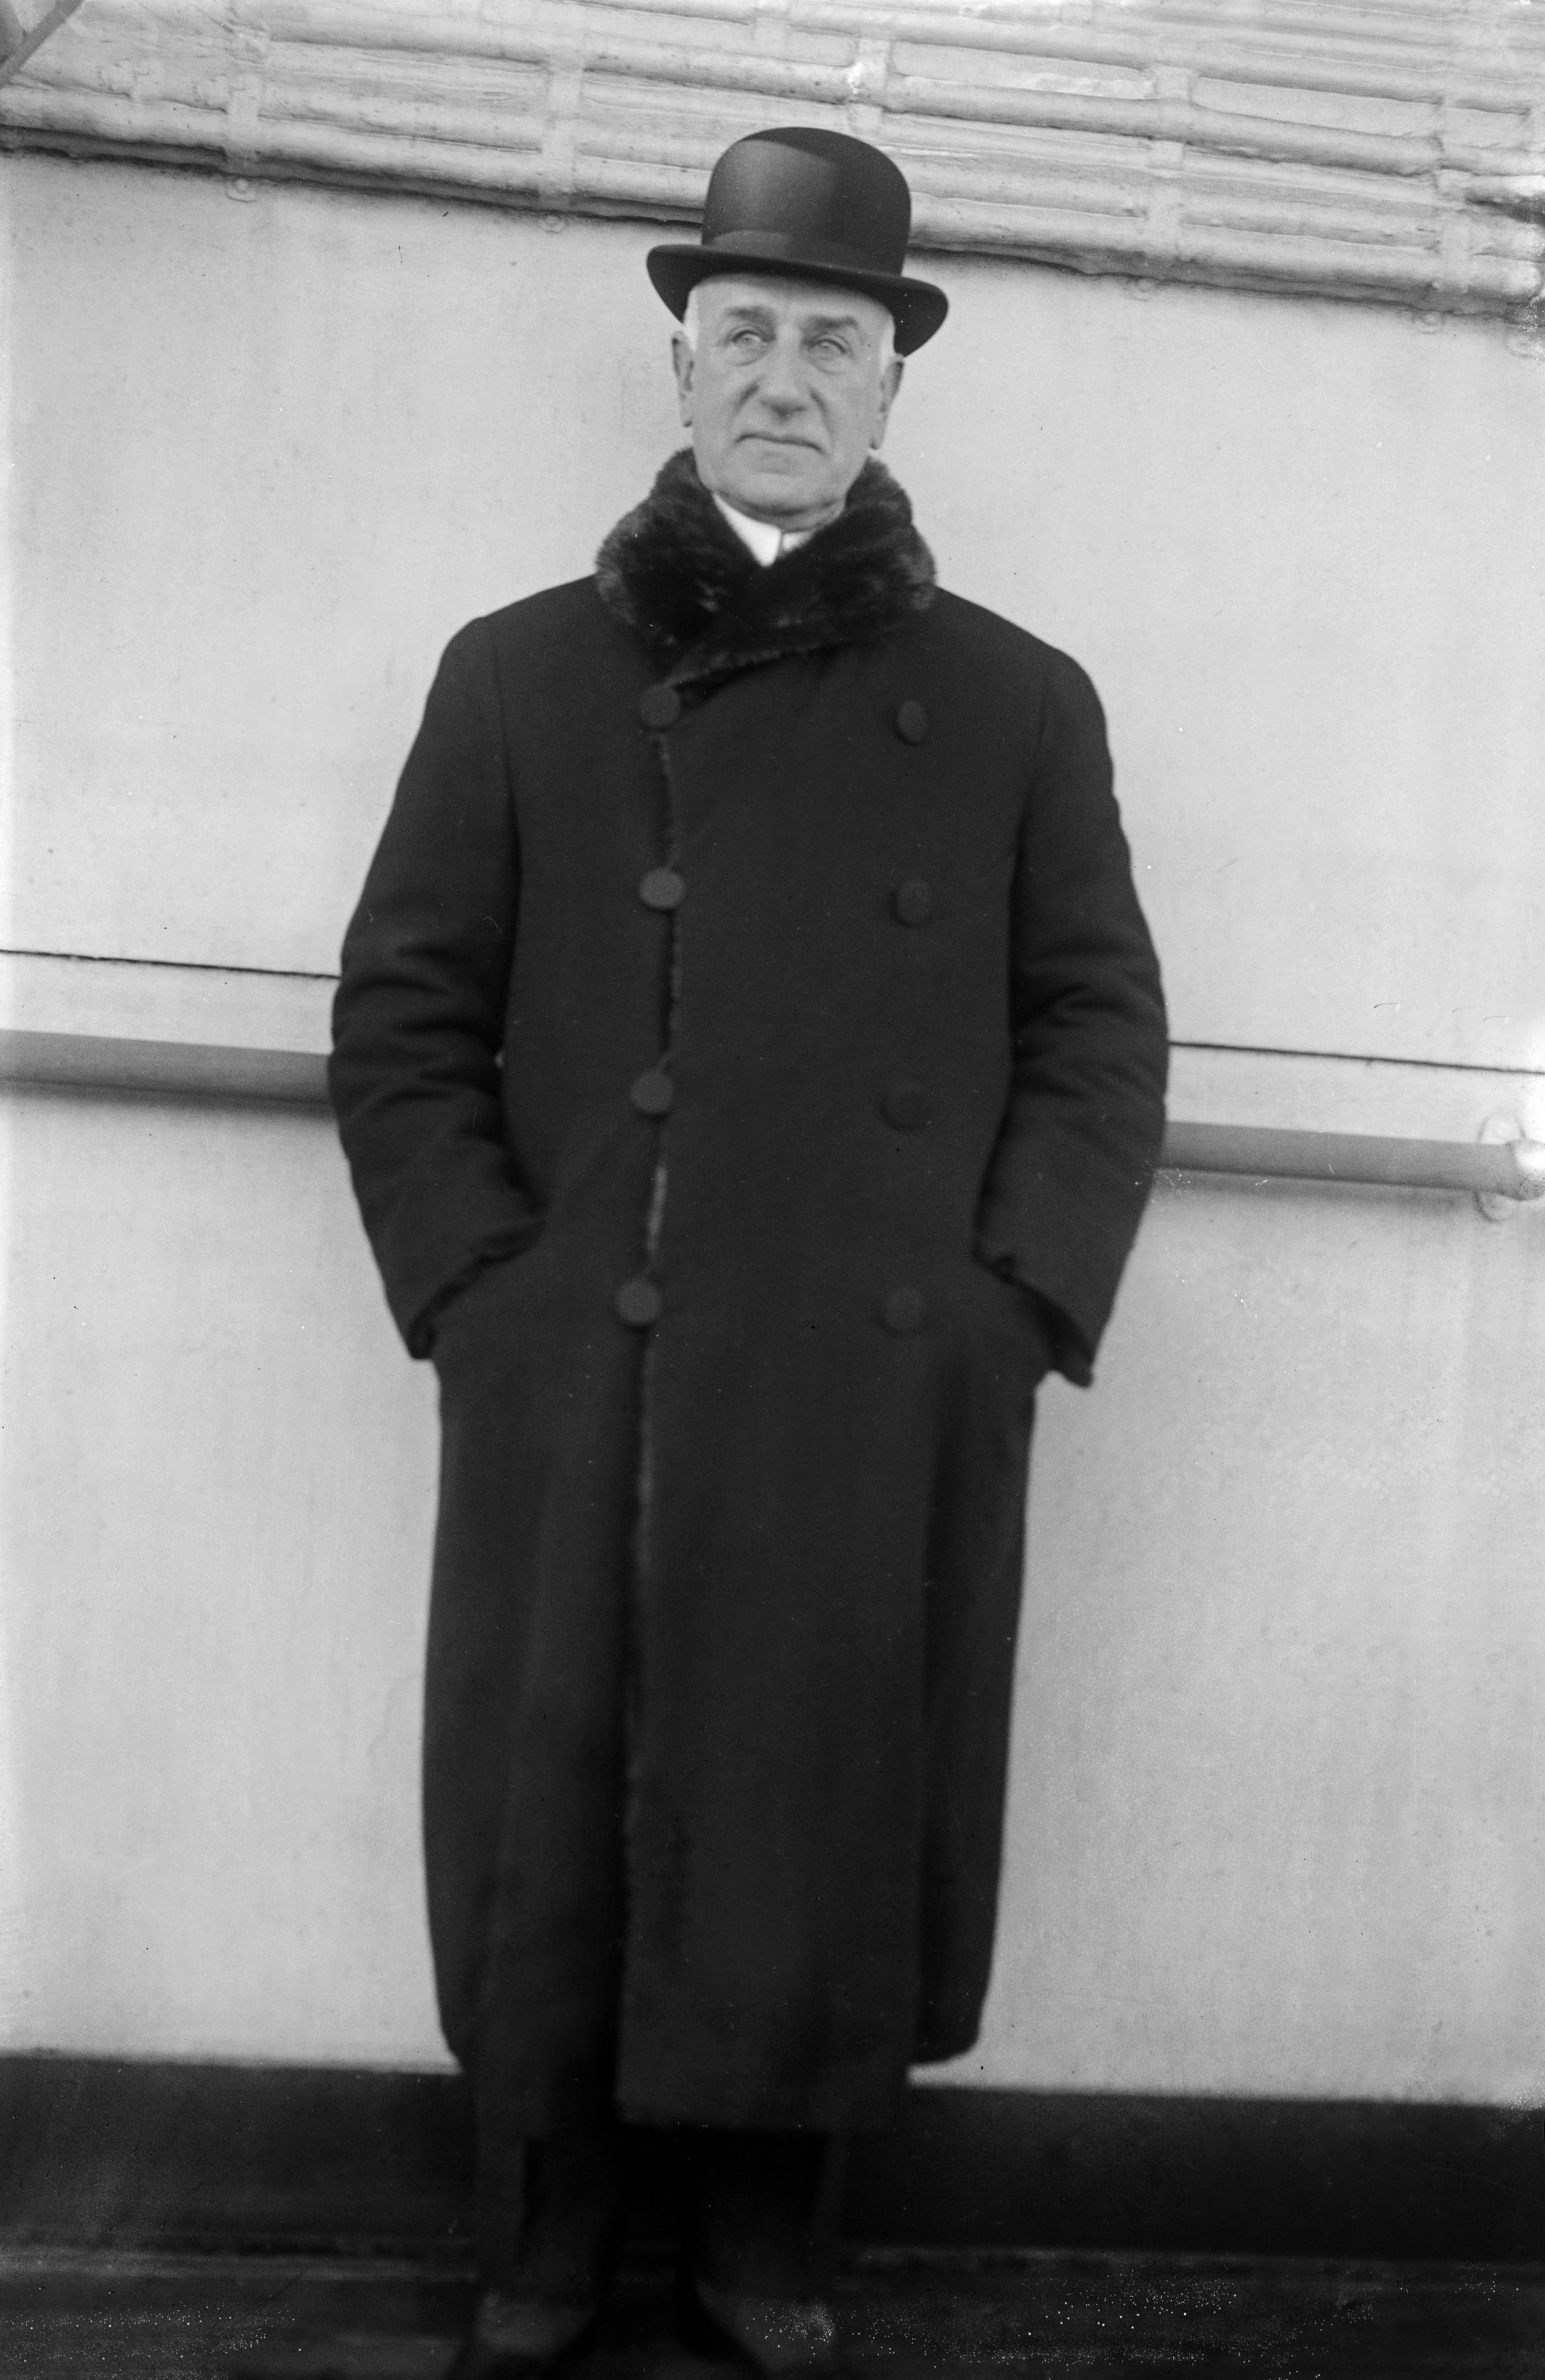 Solomon R. Guggenheim (1861-1949) was born in Philadelphia and laid the foundation for the Guggenheim Museums. IMAGO/EVERETT COLLECTION